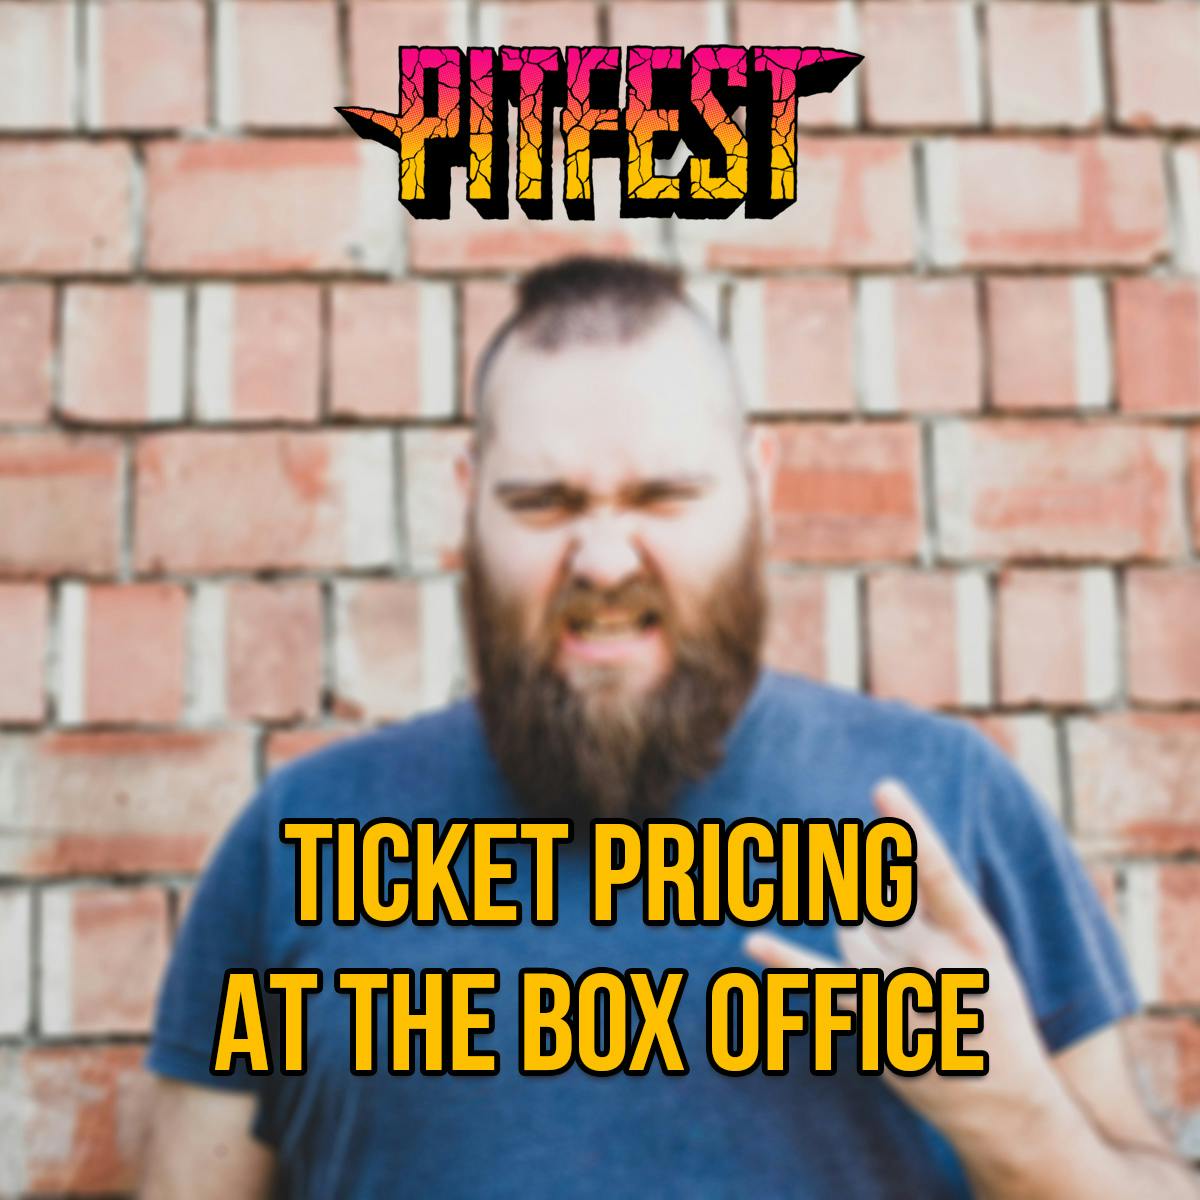 Ticket pricing at the box office